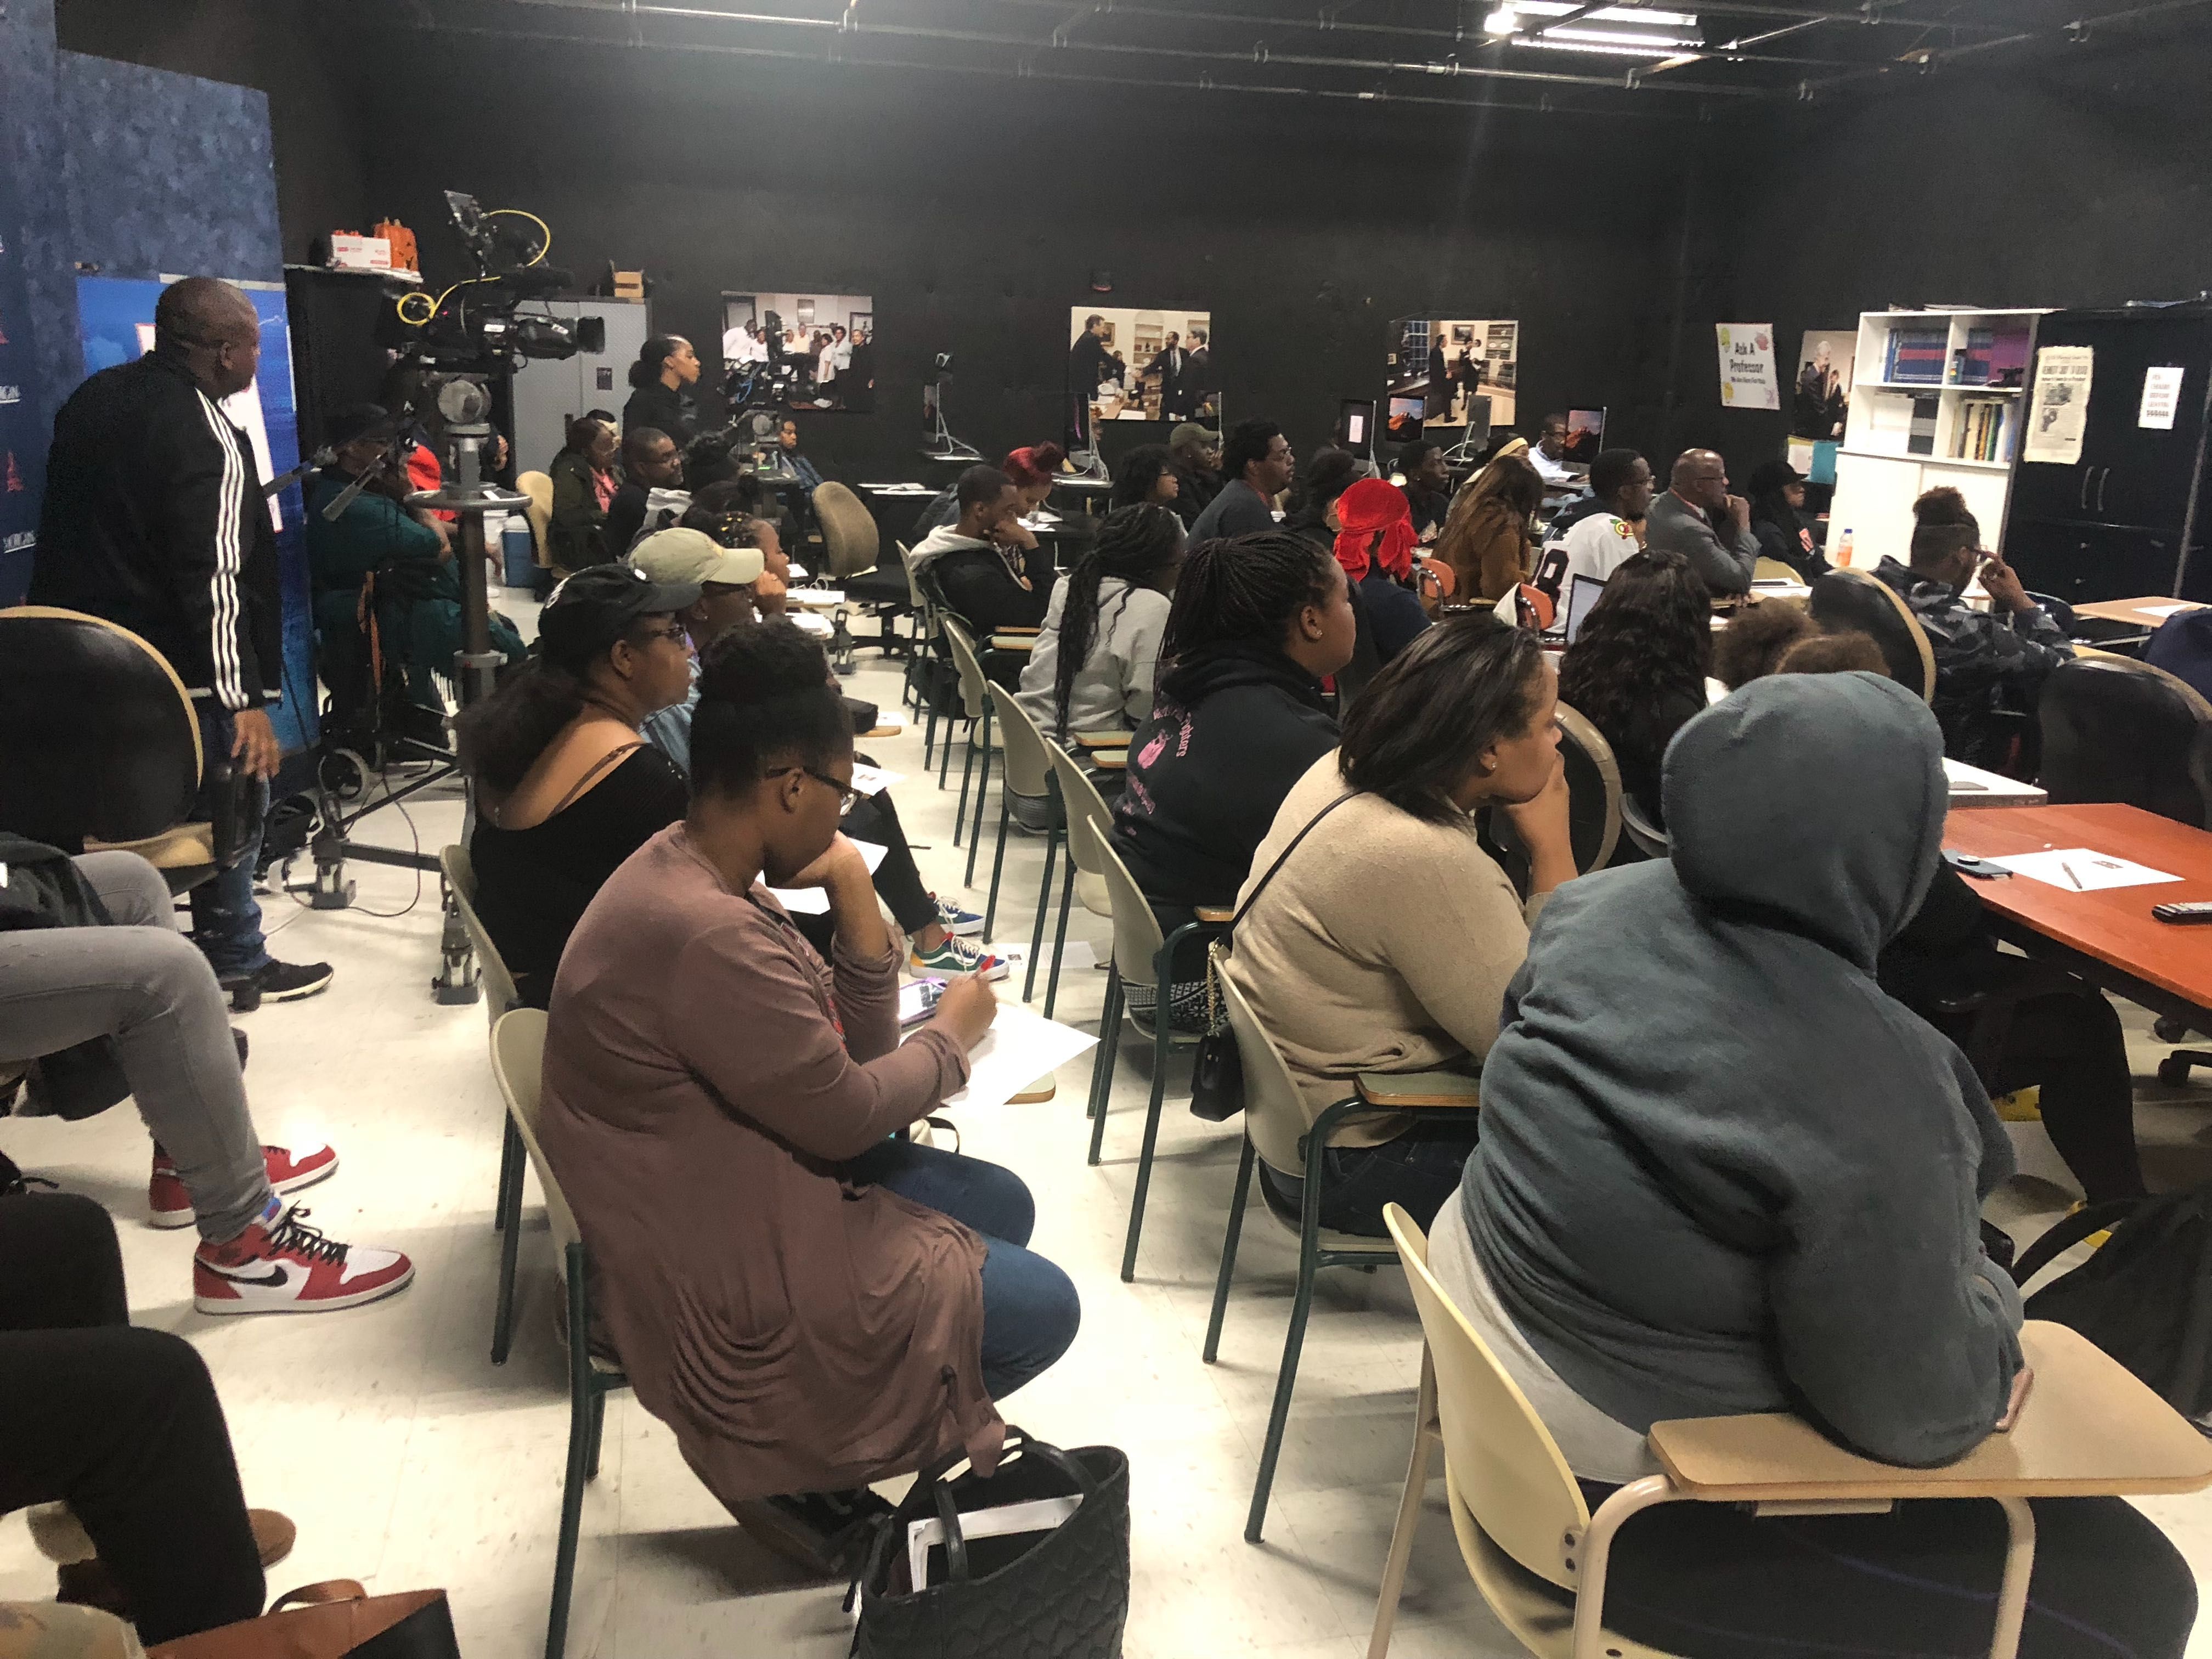 Journalists Kevin Richardson and Justin Fenton from the Baltimore Sun present to students at Morgan State University in Baltimore. Image by Hannah Berk. United States, 2019.